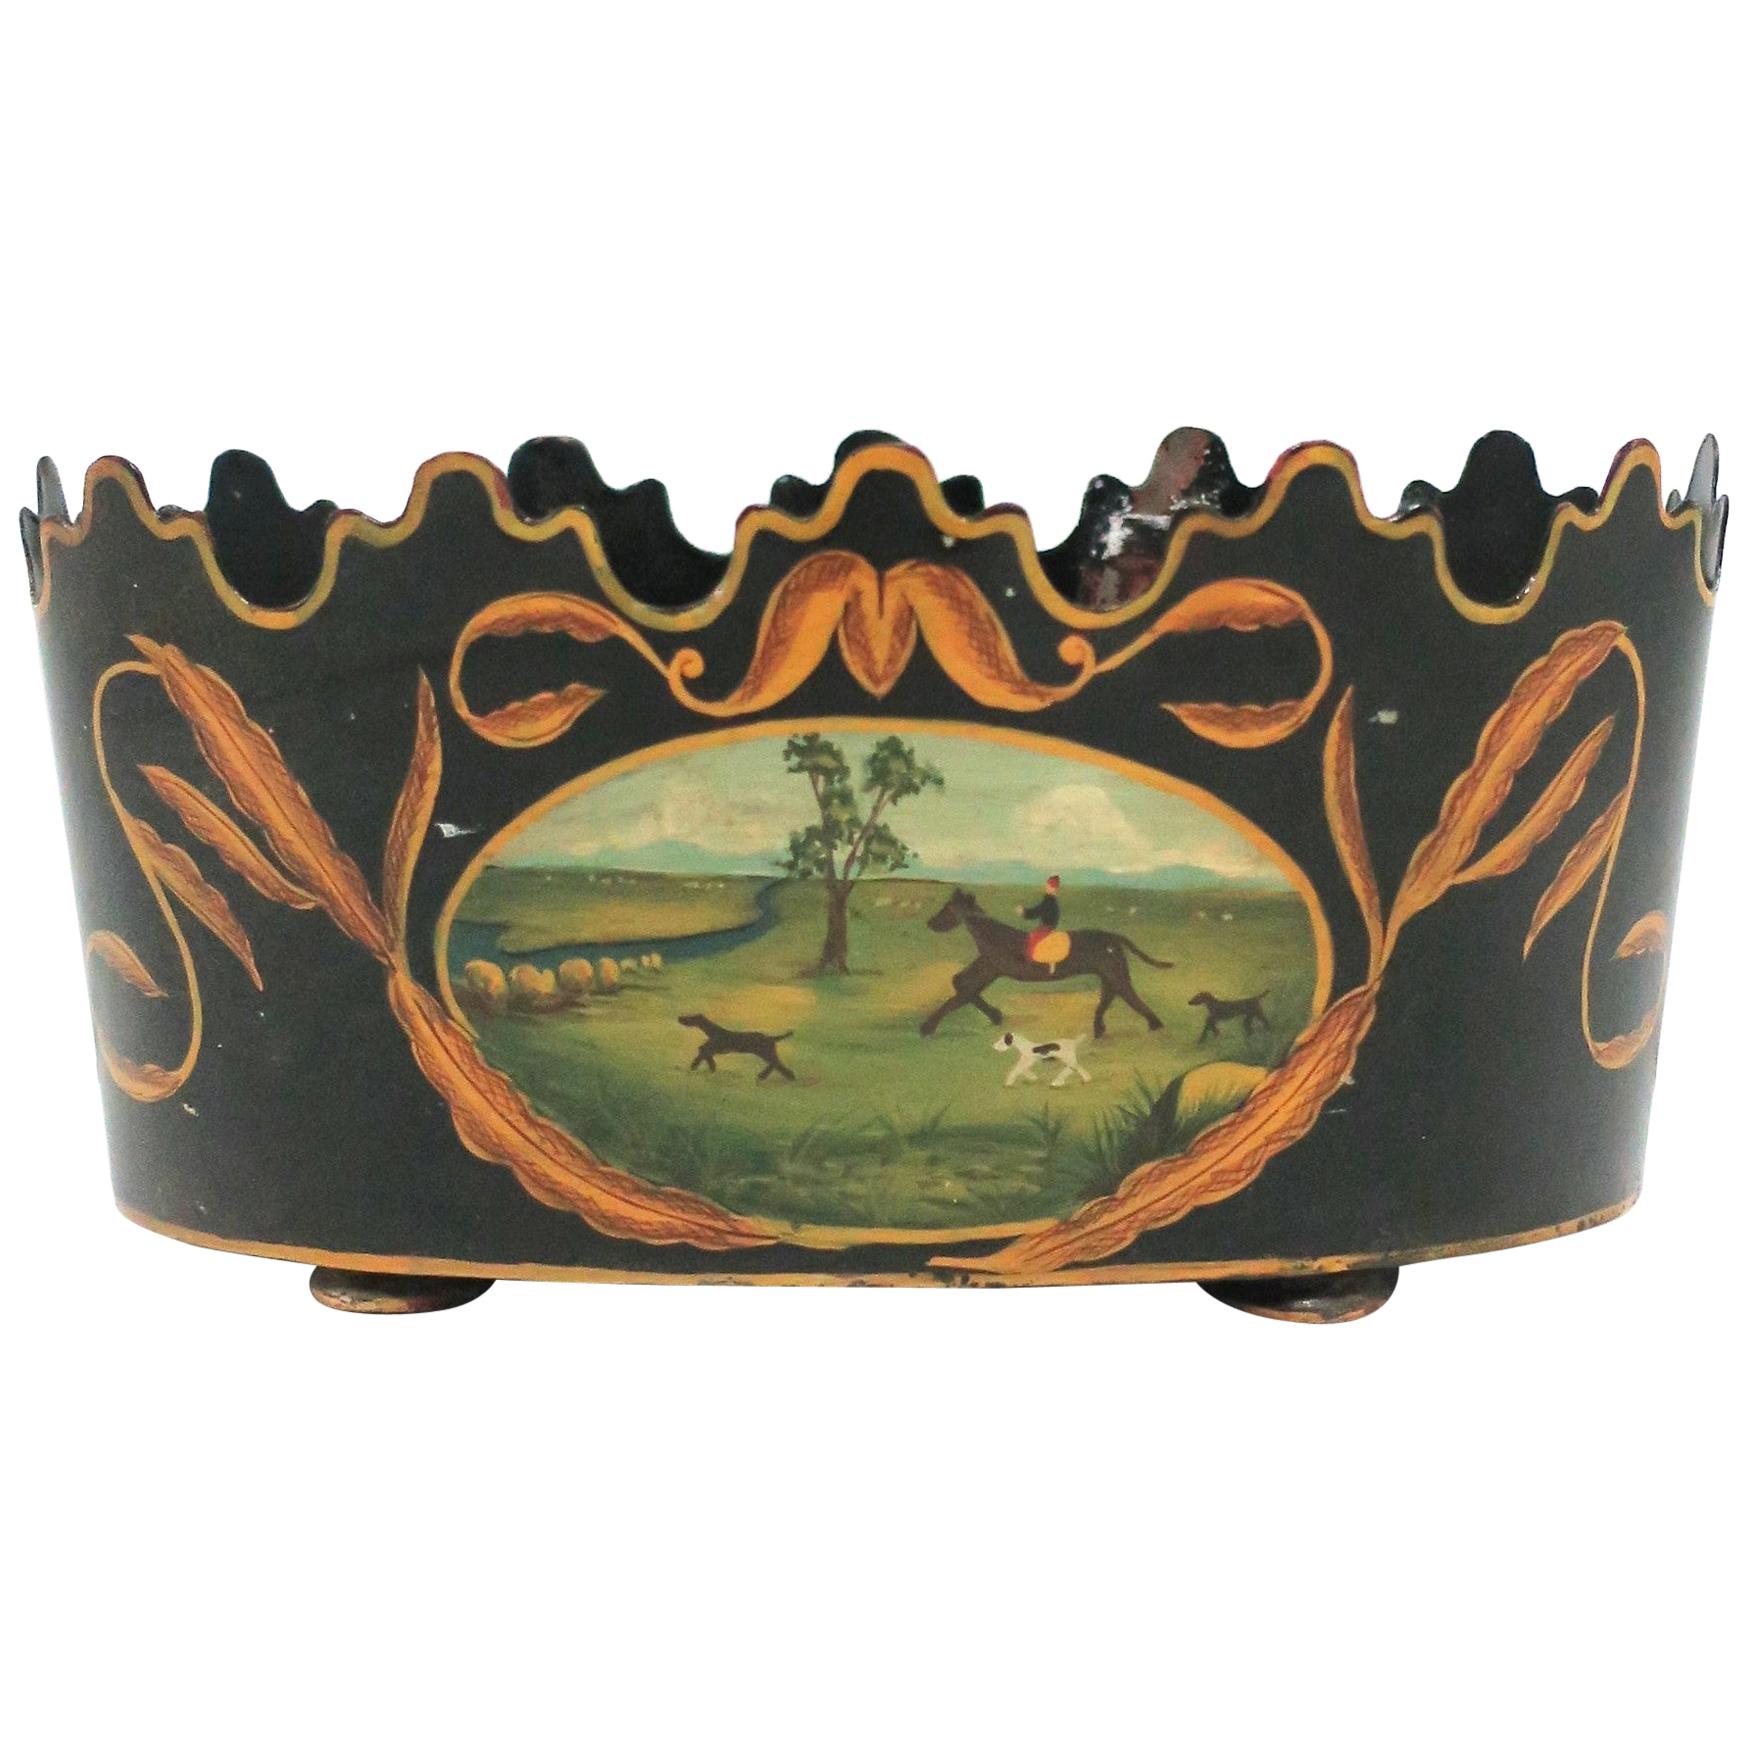 Italian Black and Gold Tole Planter Jardinière Cachepot with Horse & Dog Scene